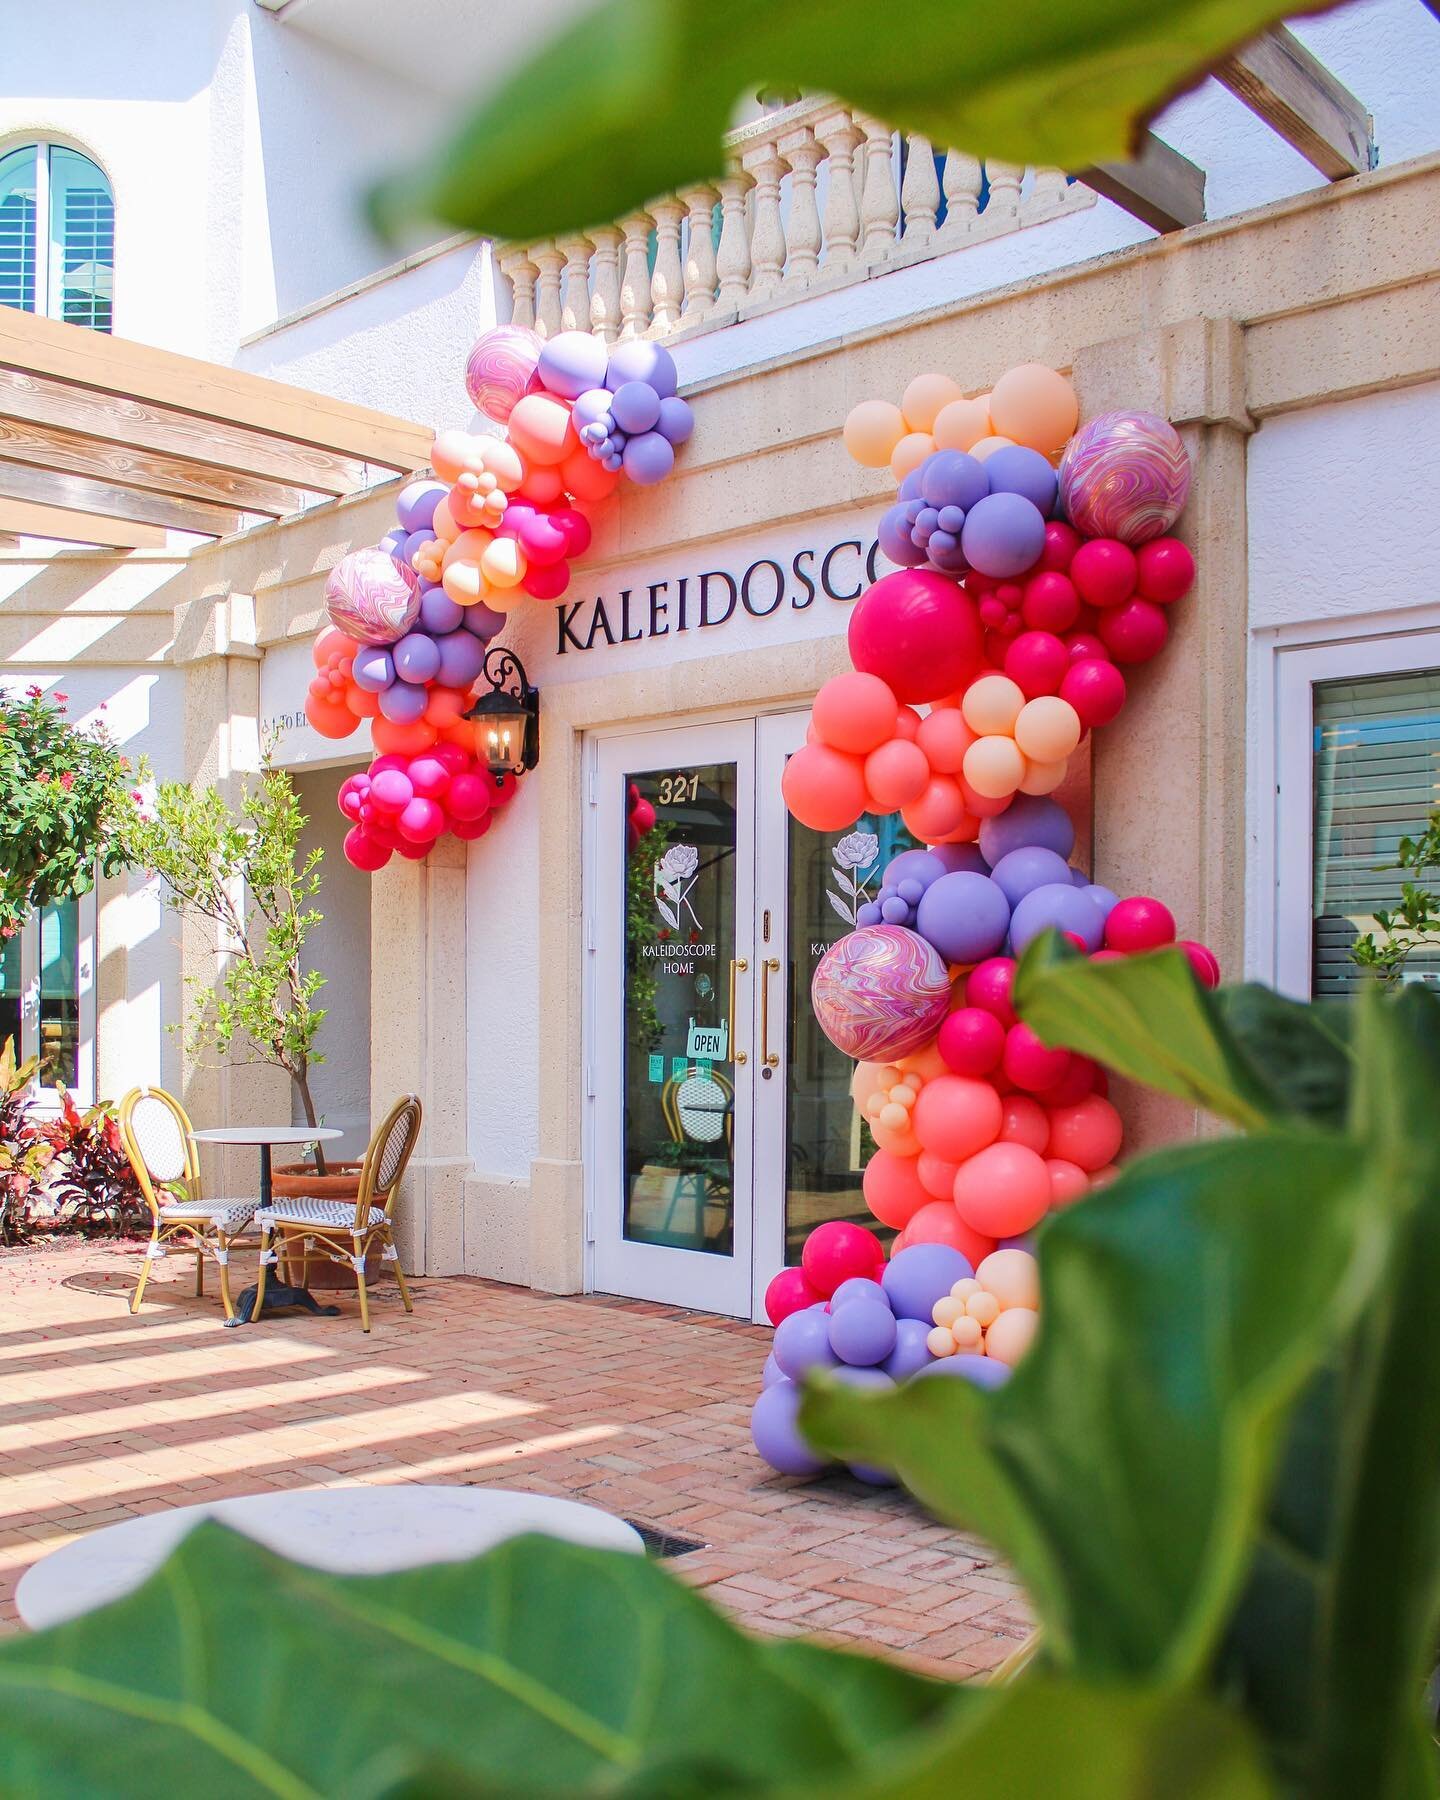 Mother&rsquo;s Day Weekend 💗

#storefrontballoons #balloongarland #balloonartist #naplesballoons #swflballoons #swfl #mothersdayballoons #mothersdayweekend #mama #mamasday